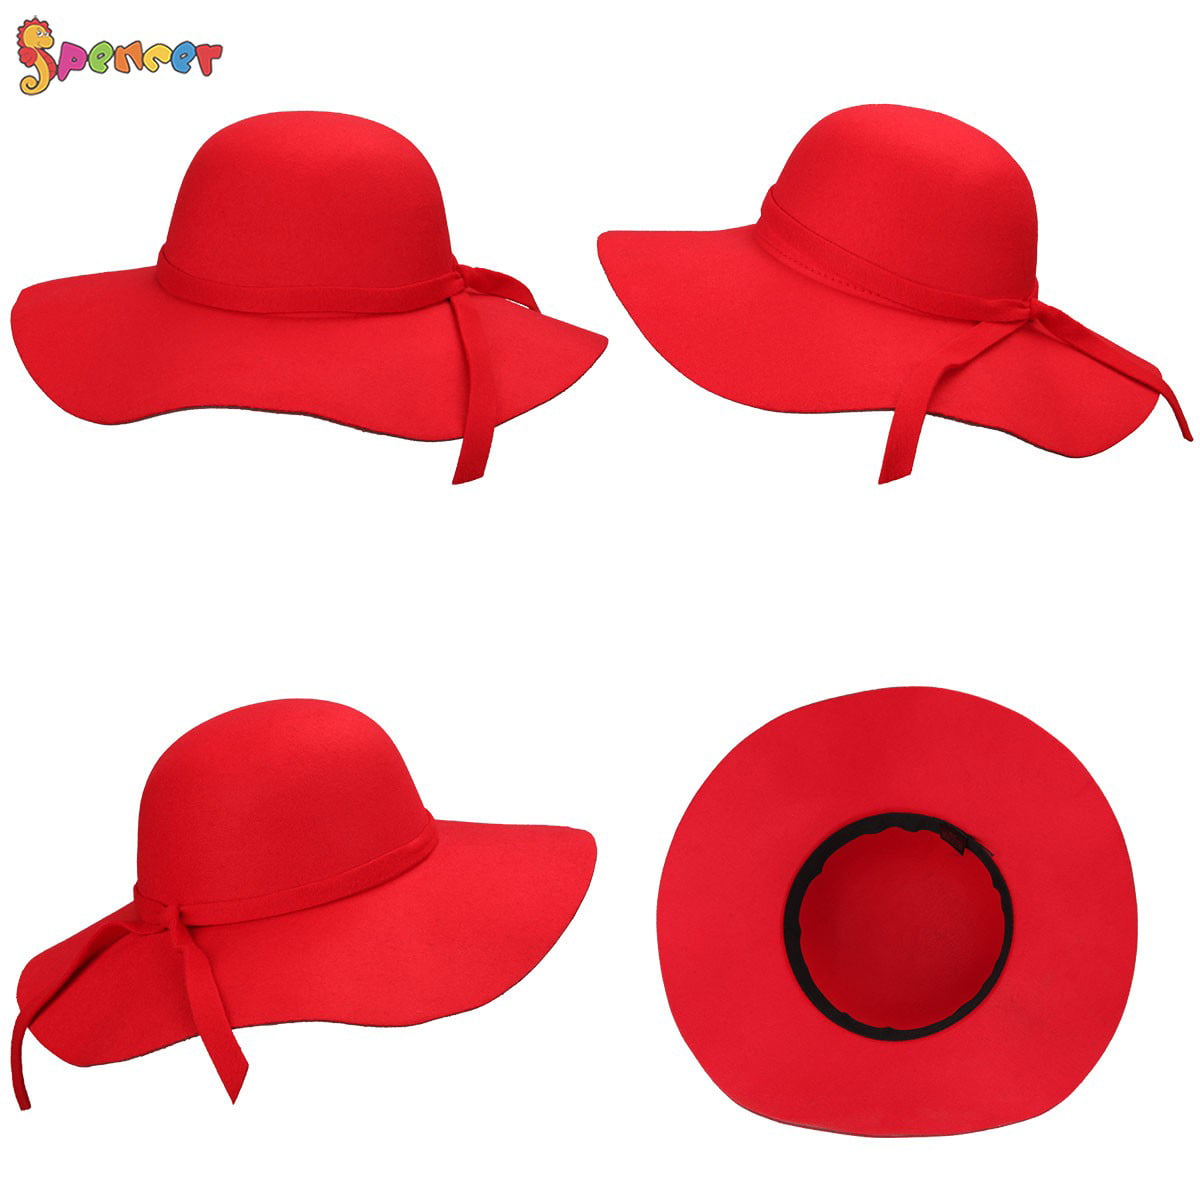  Lmtossey Winter Fedora Hats for Women Wide Brim Wool Felt Hats  with Flower Leather Wedding Hat Bowler Caps : Clothing, Shoes & Jewelry